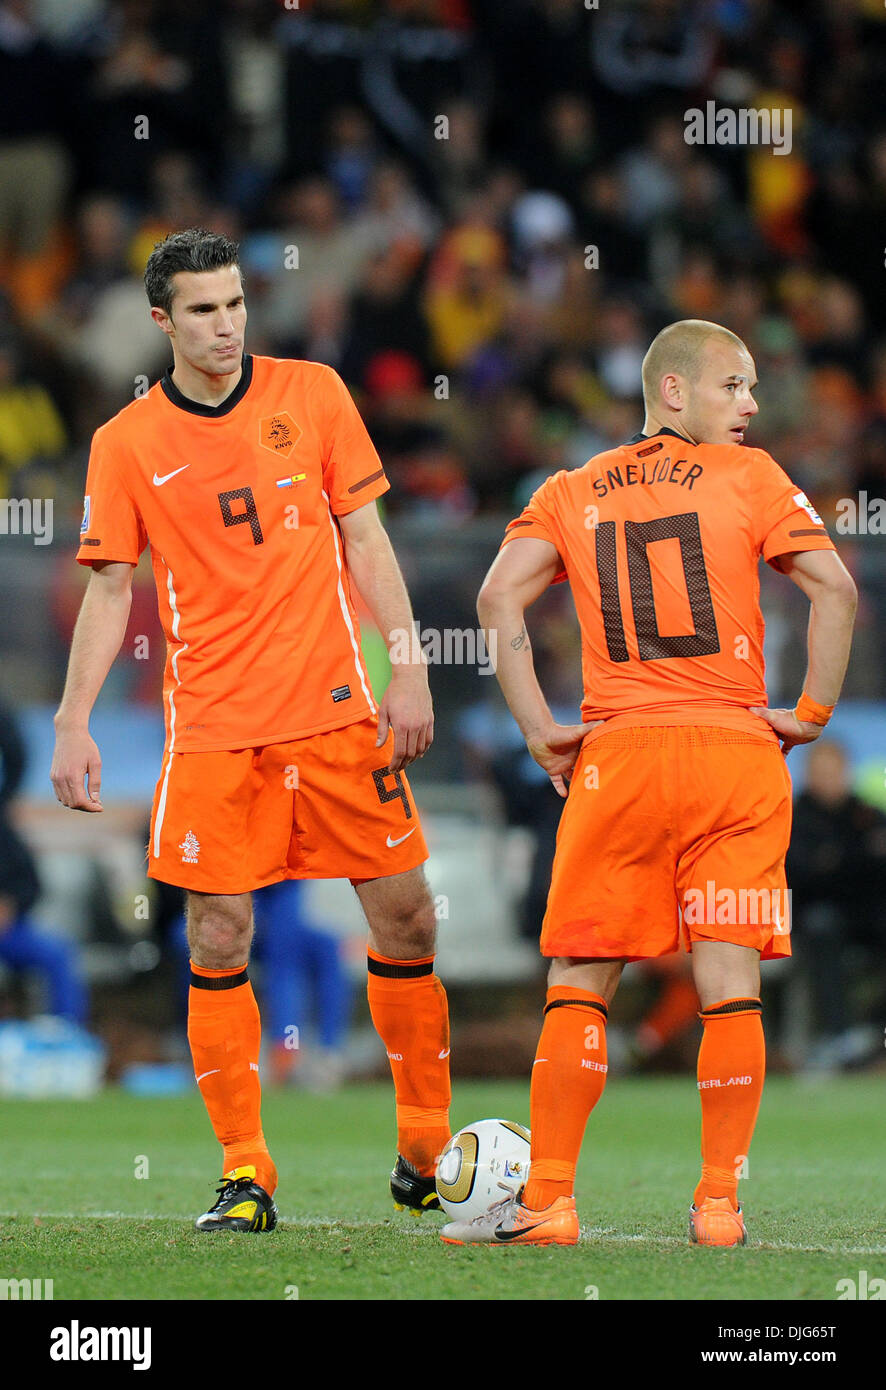 July 11, 2010 - Johannesburg, South Africa - Robin Van Persie and Wesley Sneijder of Netherlands react during the 2010 FIFA World Cup Final soccer match between Netherlands and Spain at Soccer City Stadium on July 11, 2010 in Johannesburg, South Africa. (Credit Image: © Luca Ghidoni/ZUMApress.com) Stock Photo